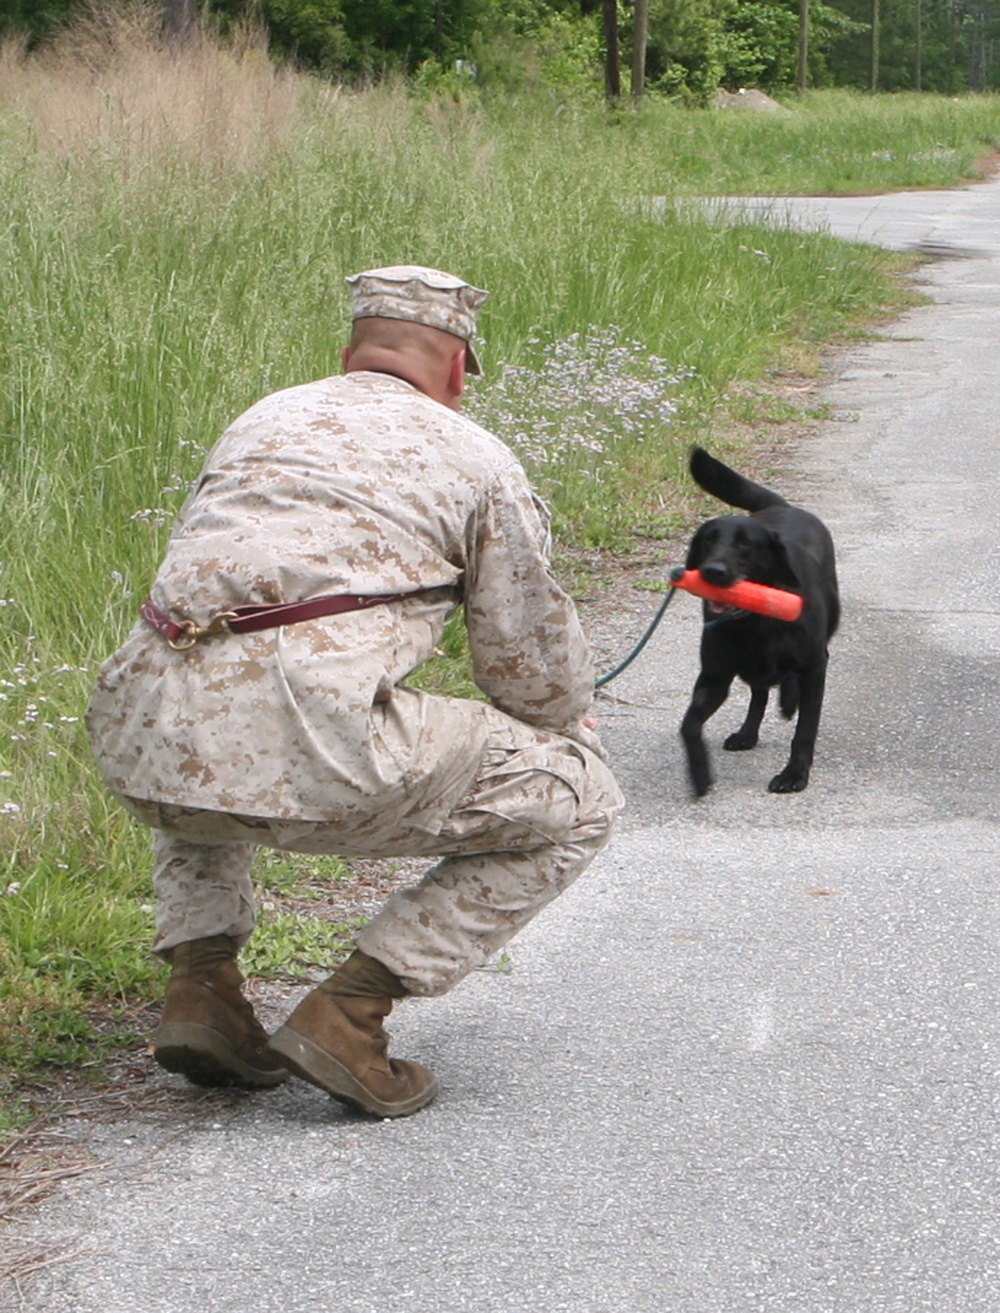 'Man's Best Friend' Helps Sniff Out improvised explosive devices